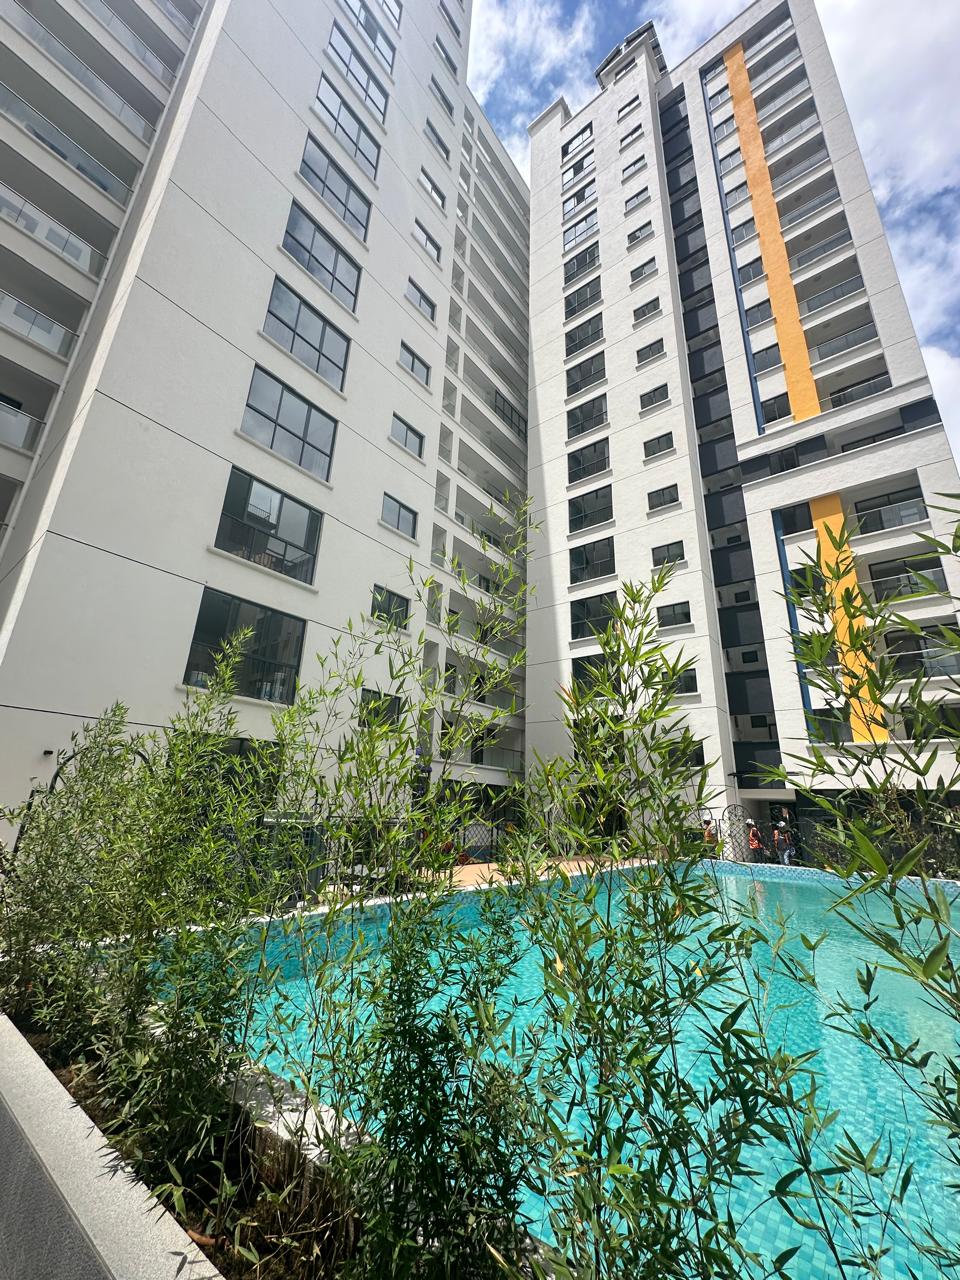 Modern 3 Bedroom Apartment plus DSQ for Sale Living room with a balcony, Lifts, and swimming pool, Gym, and Kids play area. Asking Pice: 18.5 M. Musilli Homes.